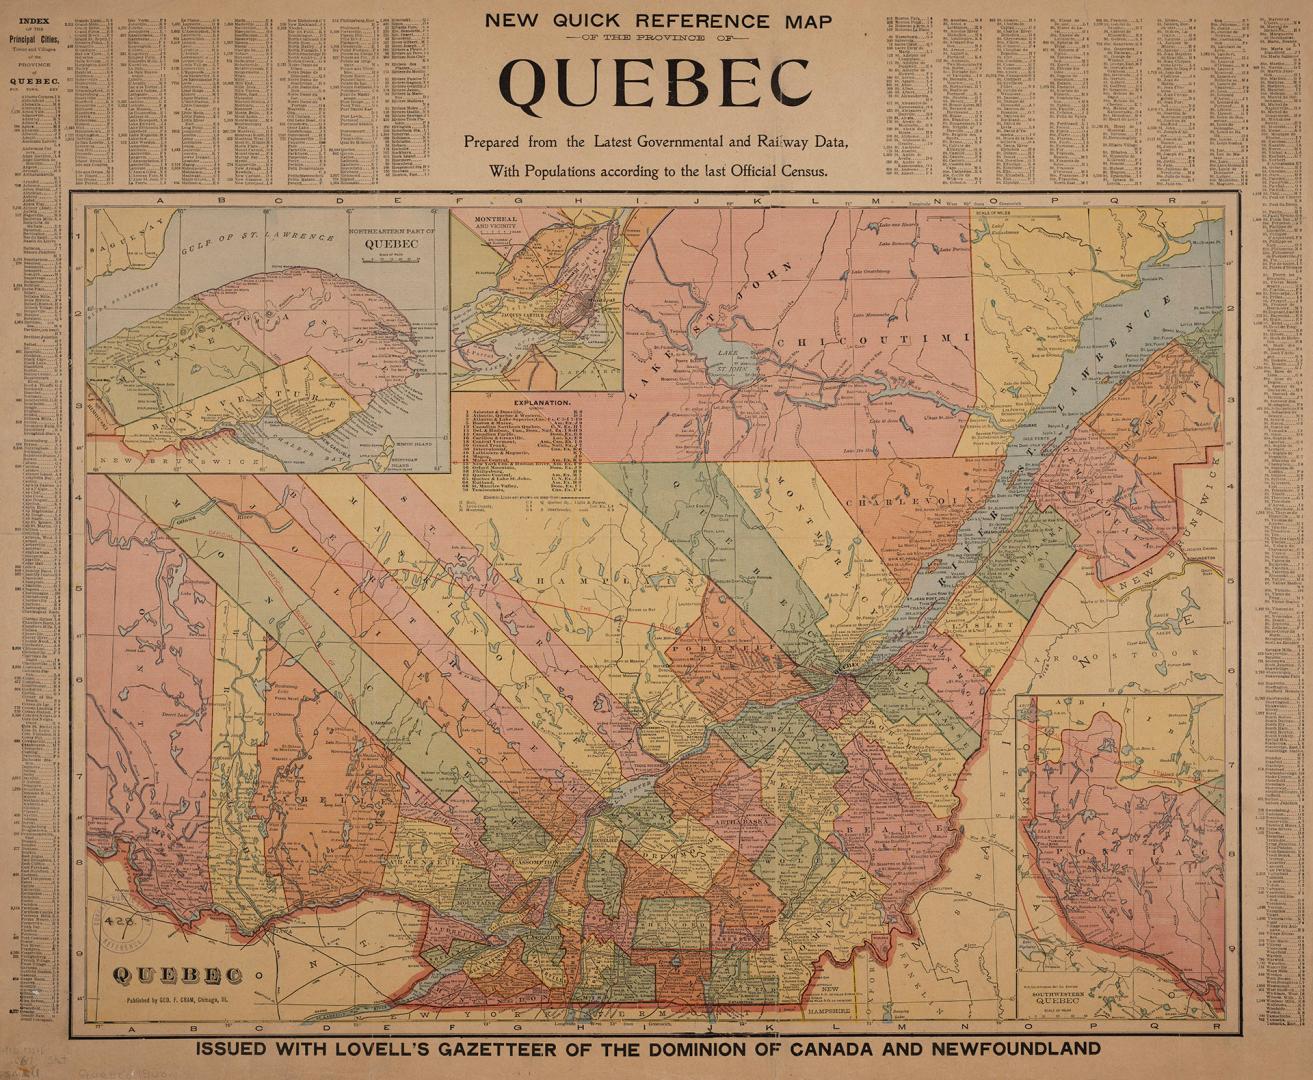 New quick reference map of the province of Québec prepared from the latest Governmental and railway data, with populations according to the last official census.